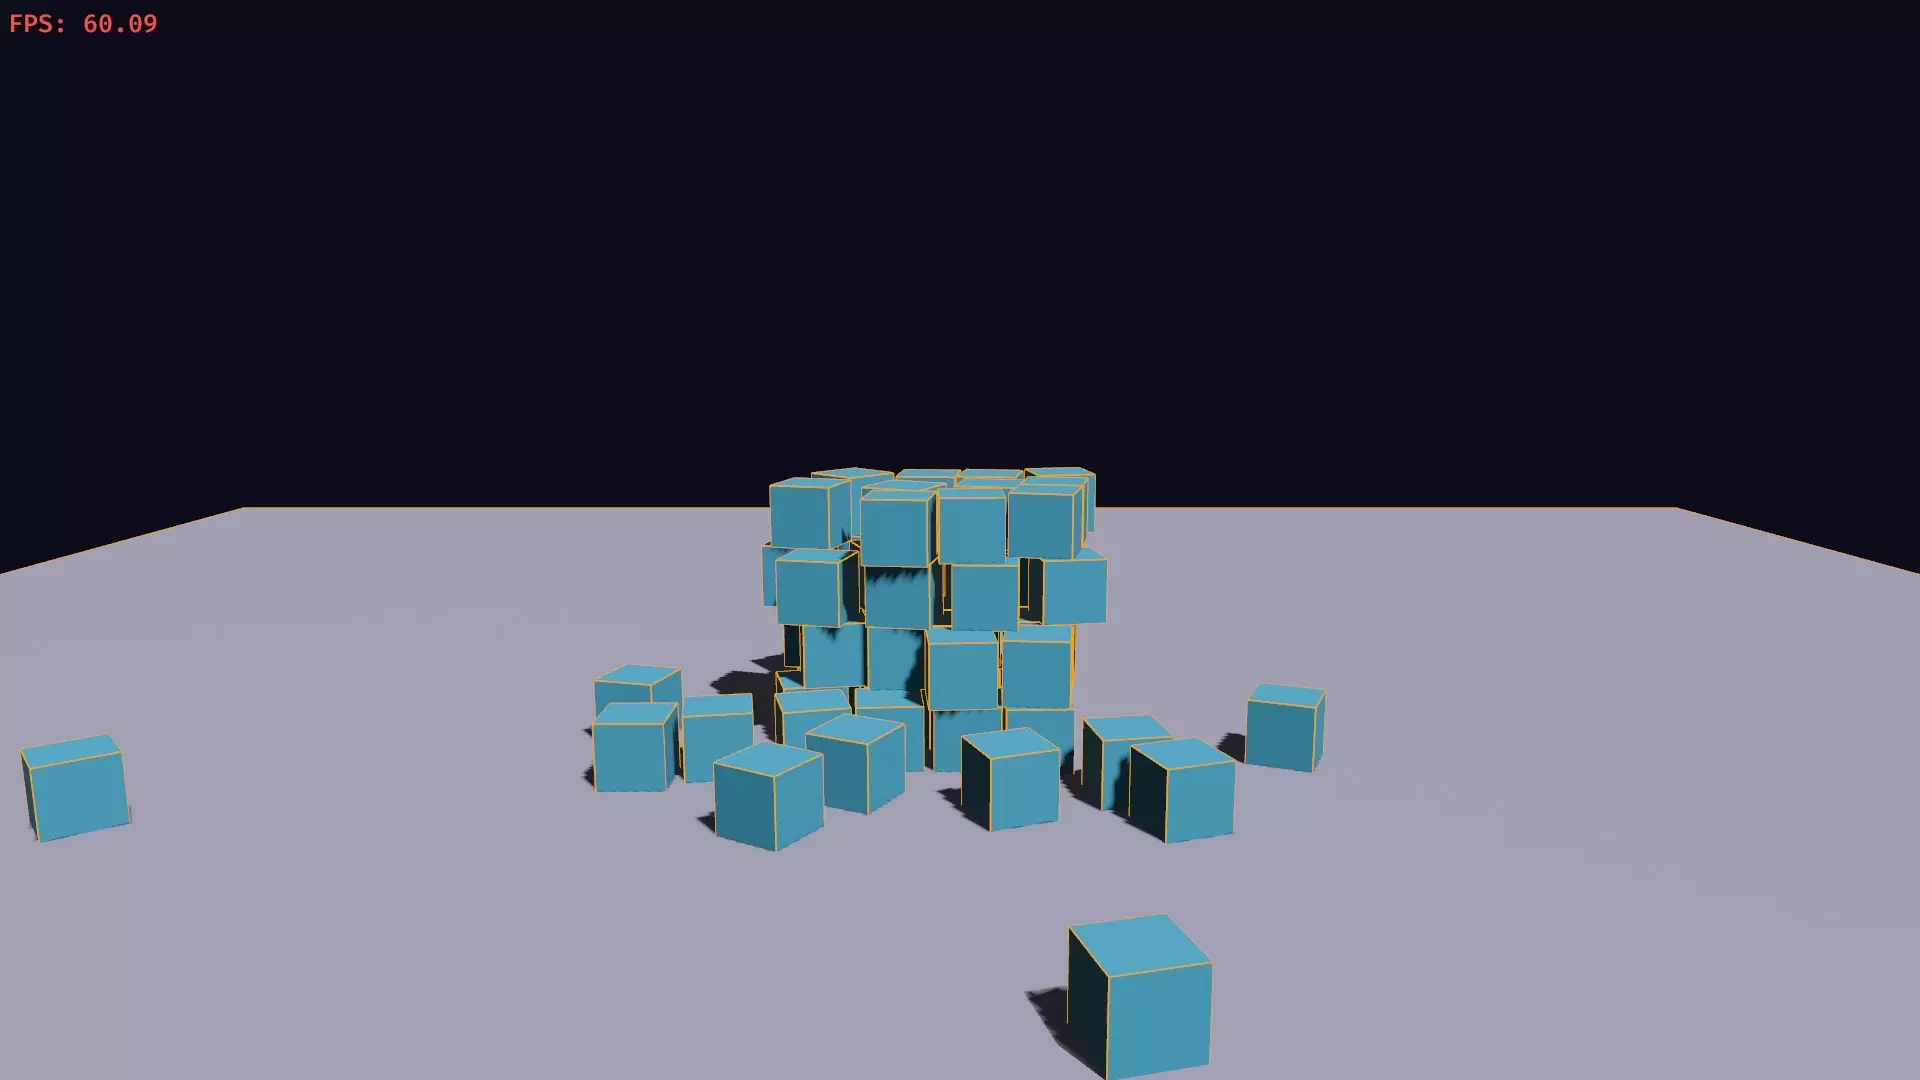 Cubes falling to the ground, drifting and jumping around